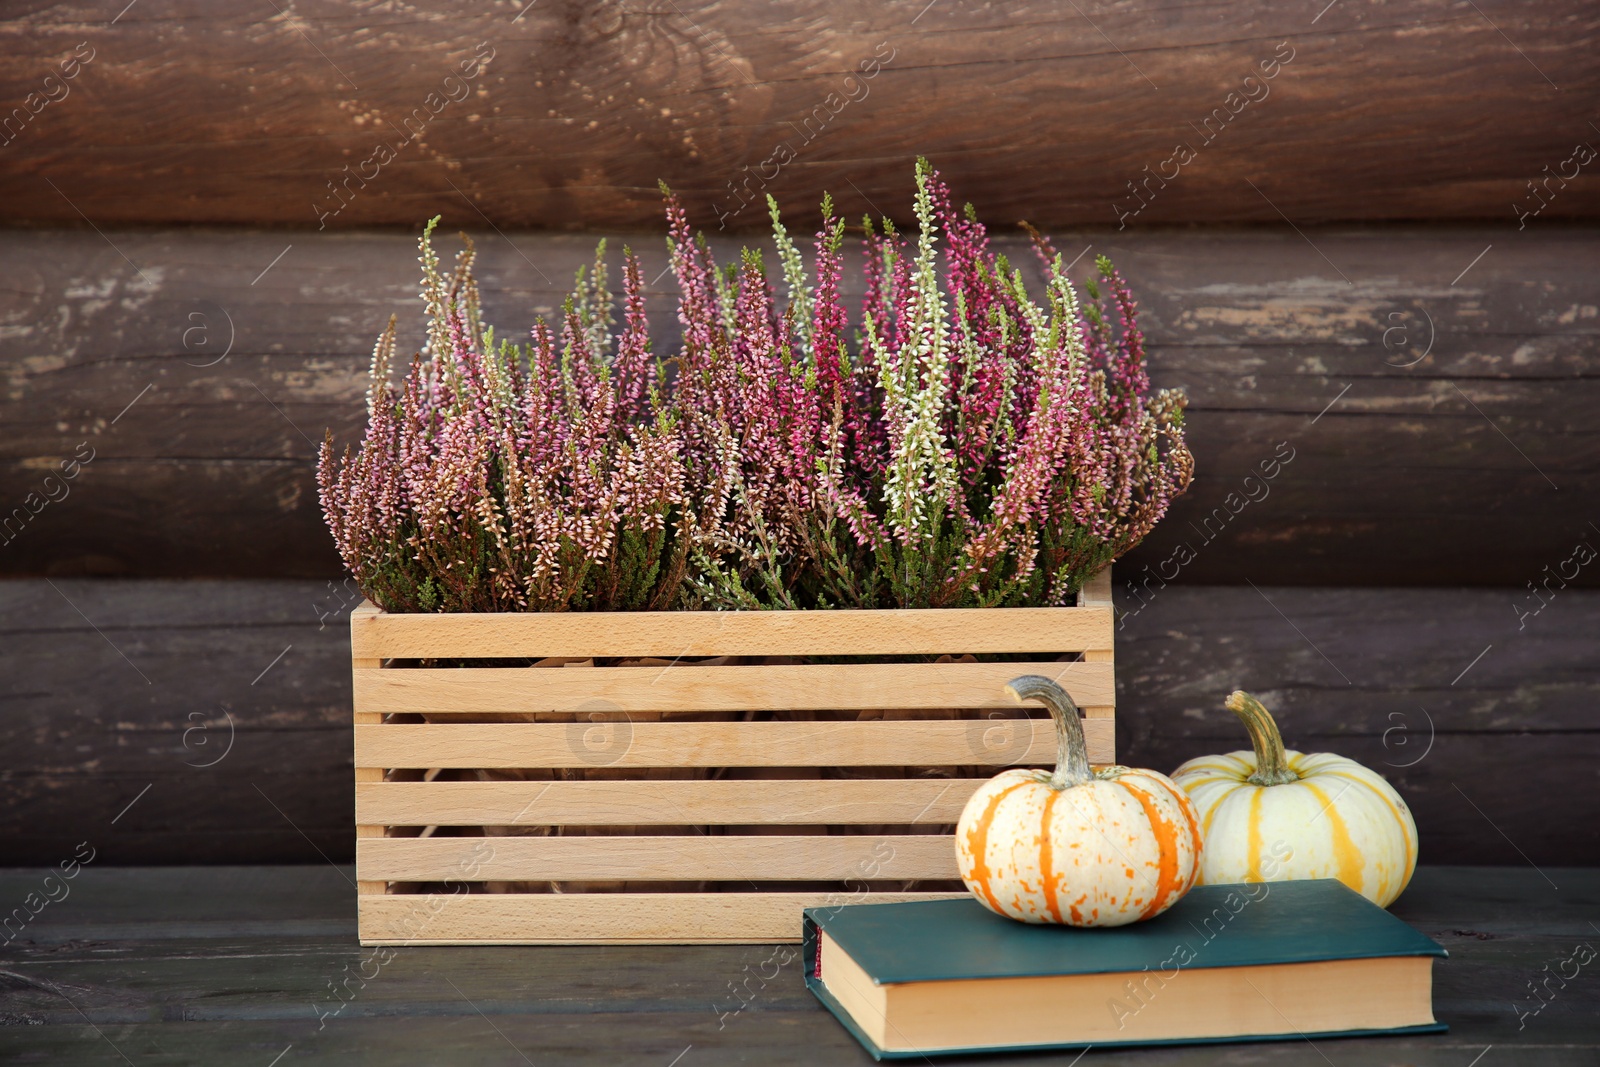 Photo of Beautiful heather flowers in crate, book and pumpkins on table near wooden wall